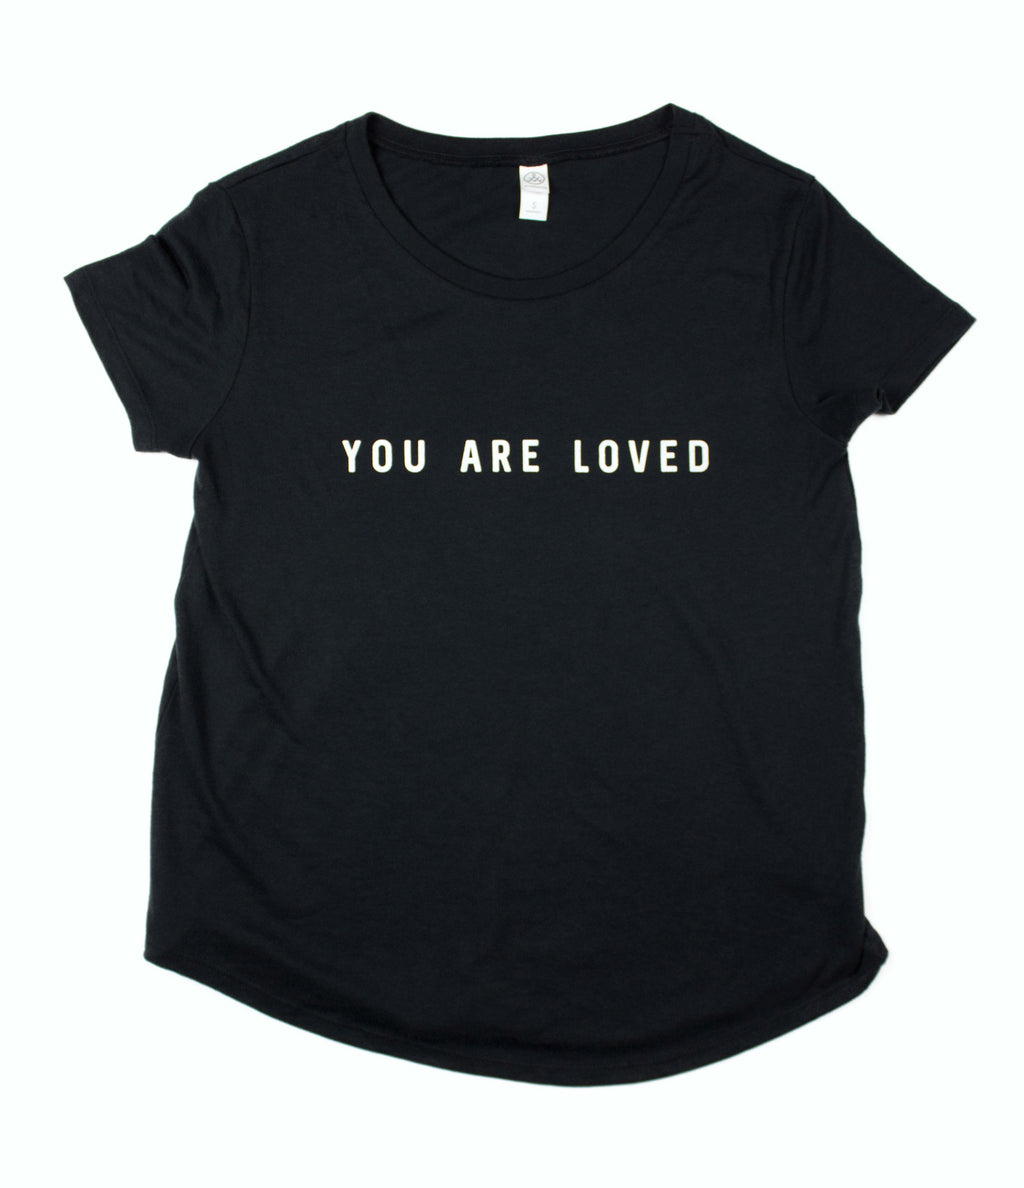 YOU ARE LOVED BLACK WOMEN'S SCOOP NECK T-SHIRT